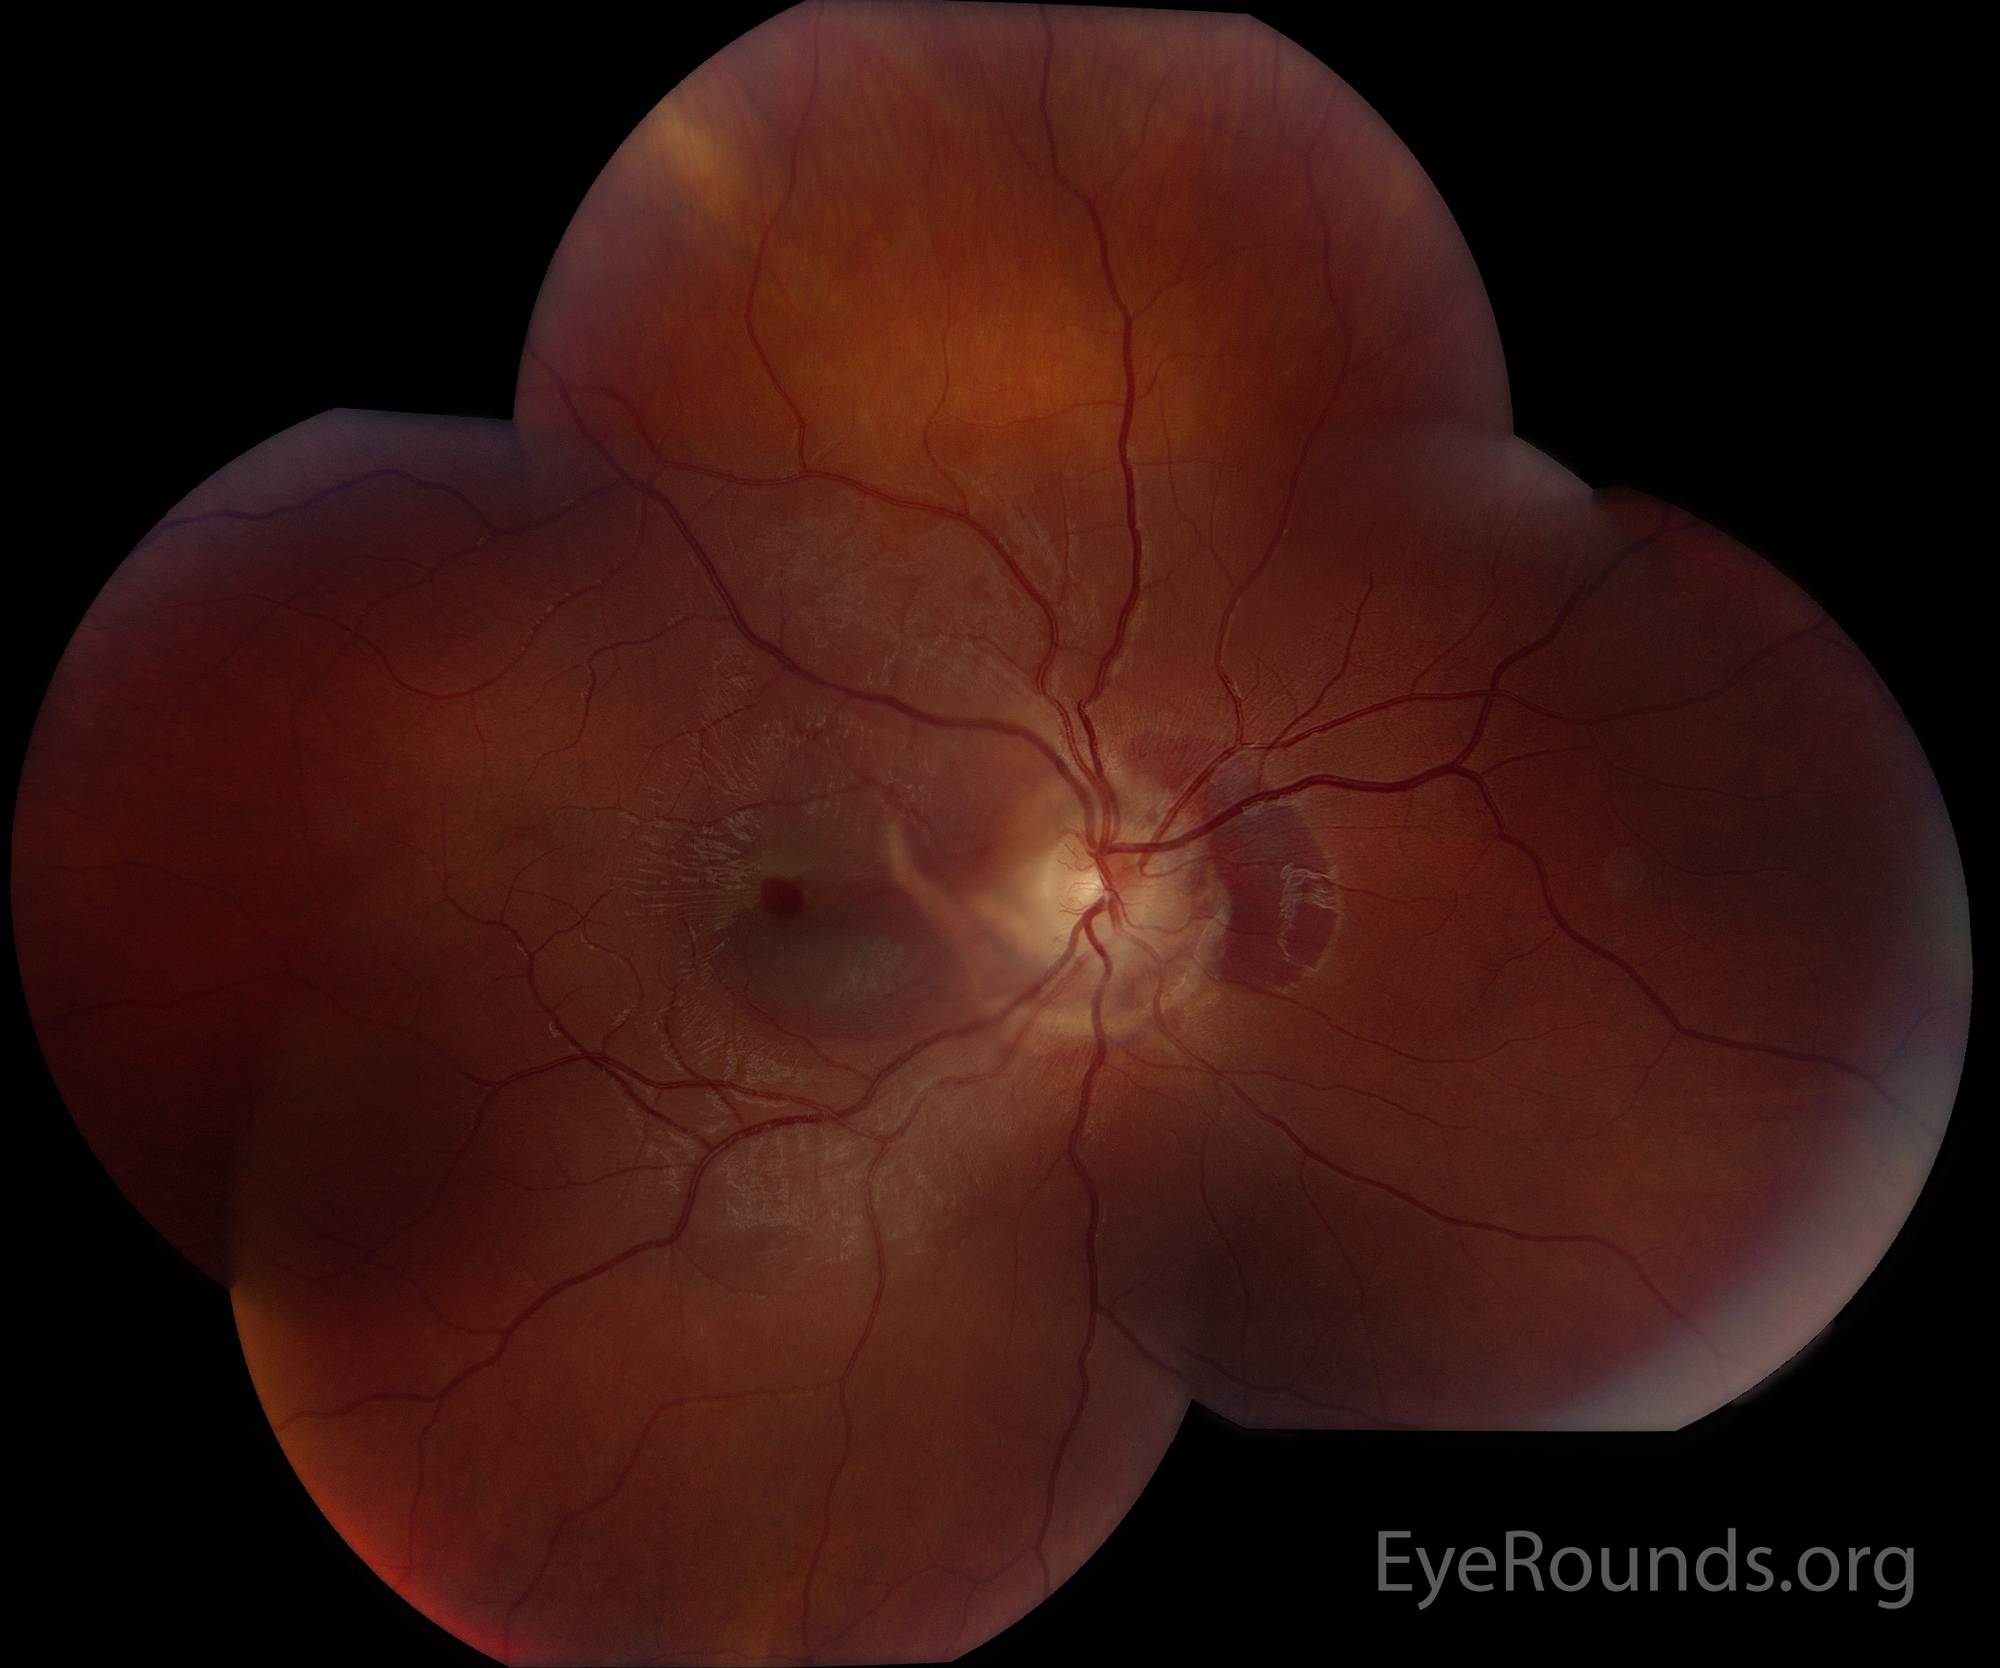  Color fundus montage photograph of the right eye shows a macular hole and peripapillary choroidal ruptures extending into the macula